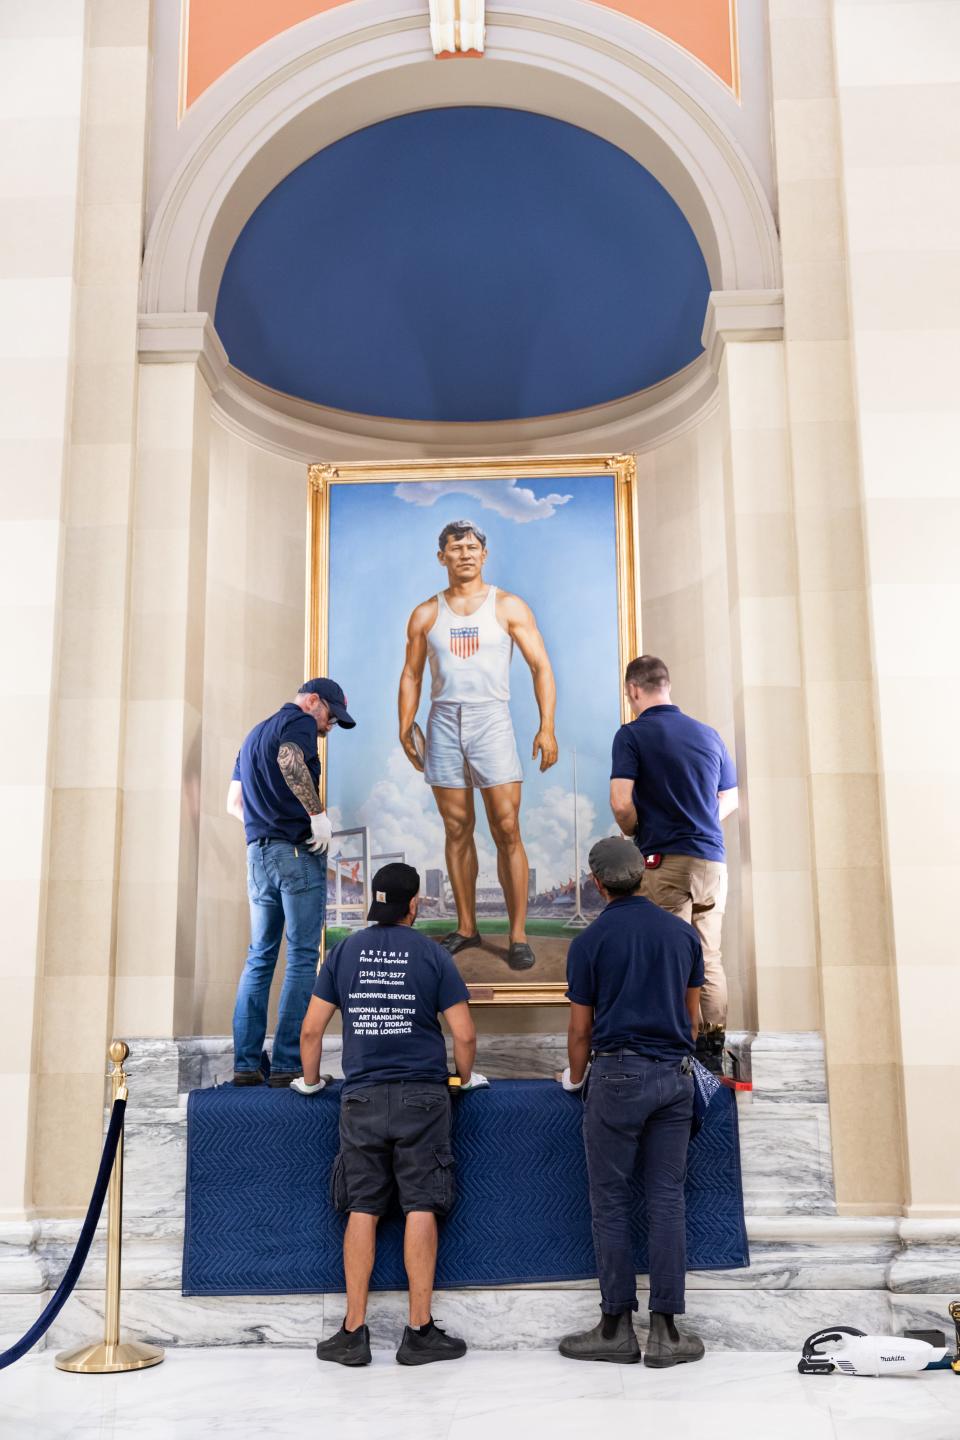 “Jim Thorpe” by Charles Banks Wilson is pictured on the fourth floor of the Oklahoma state Capitol.